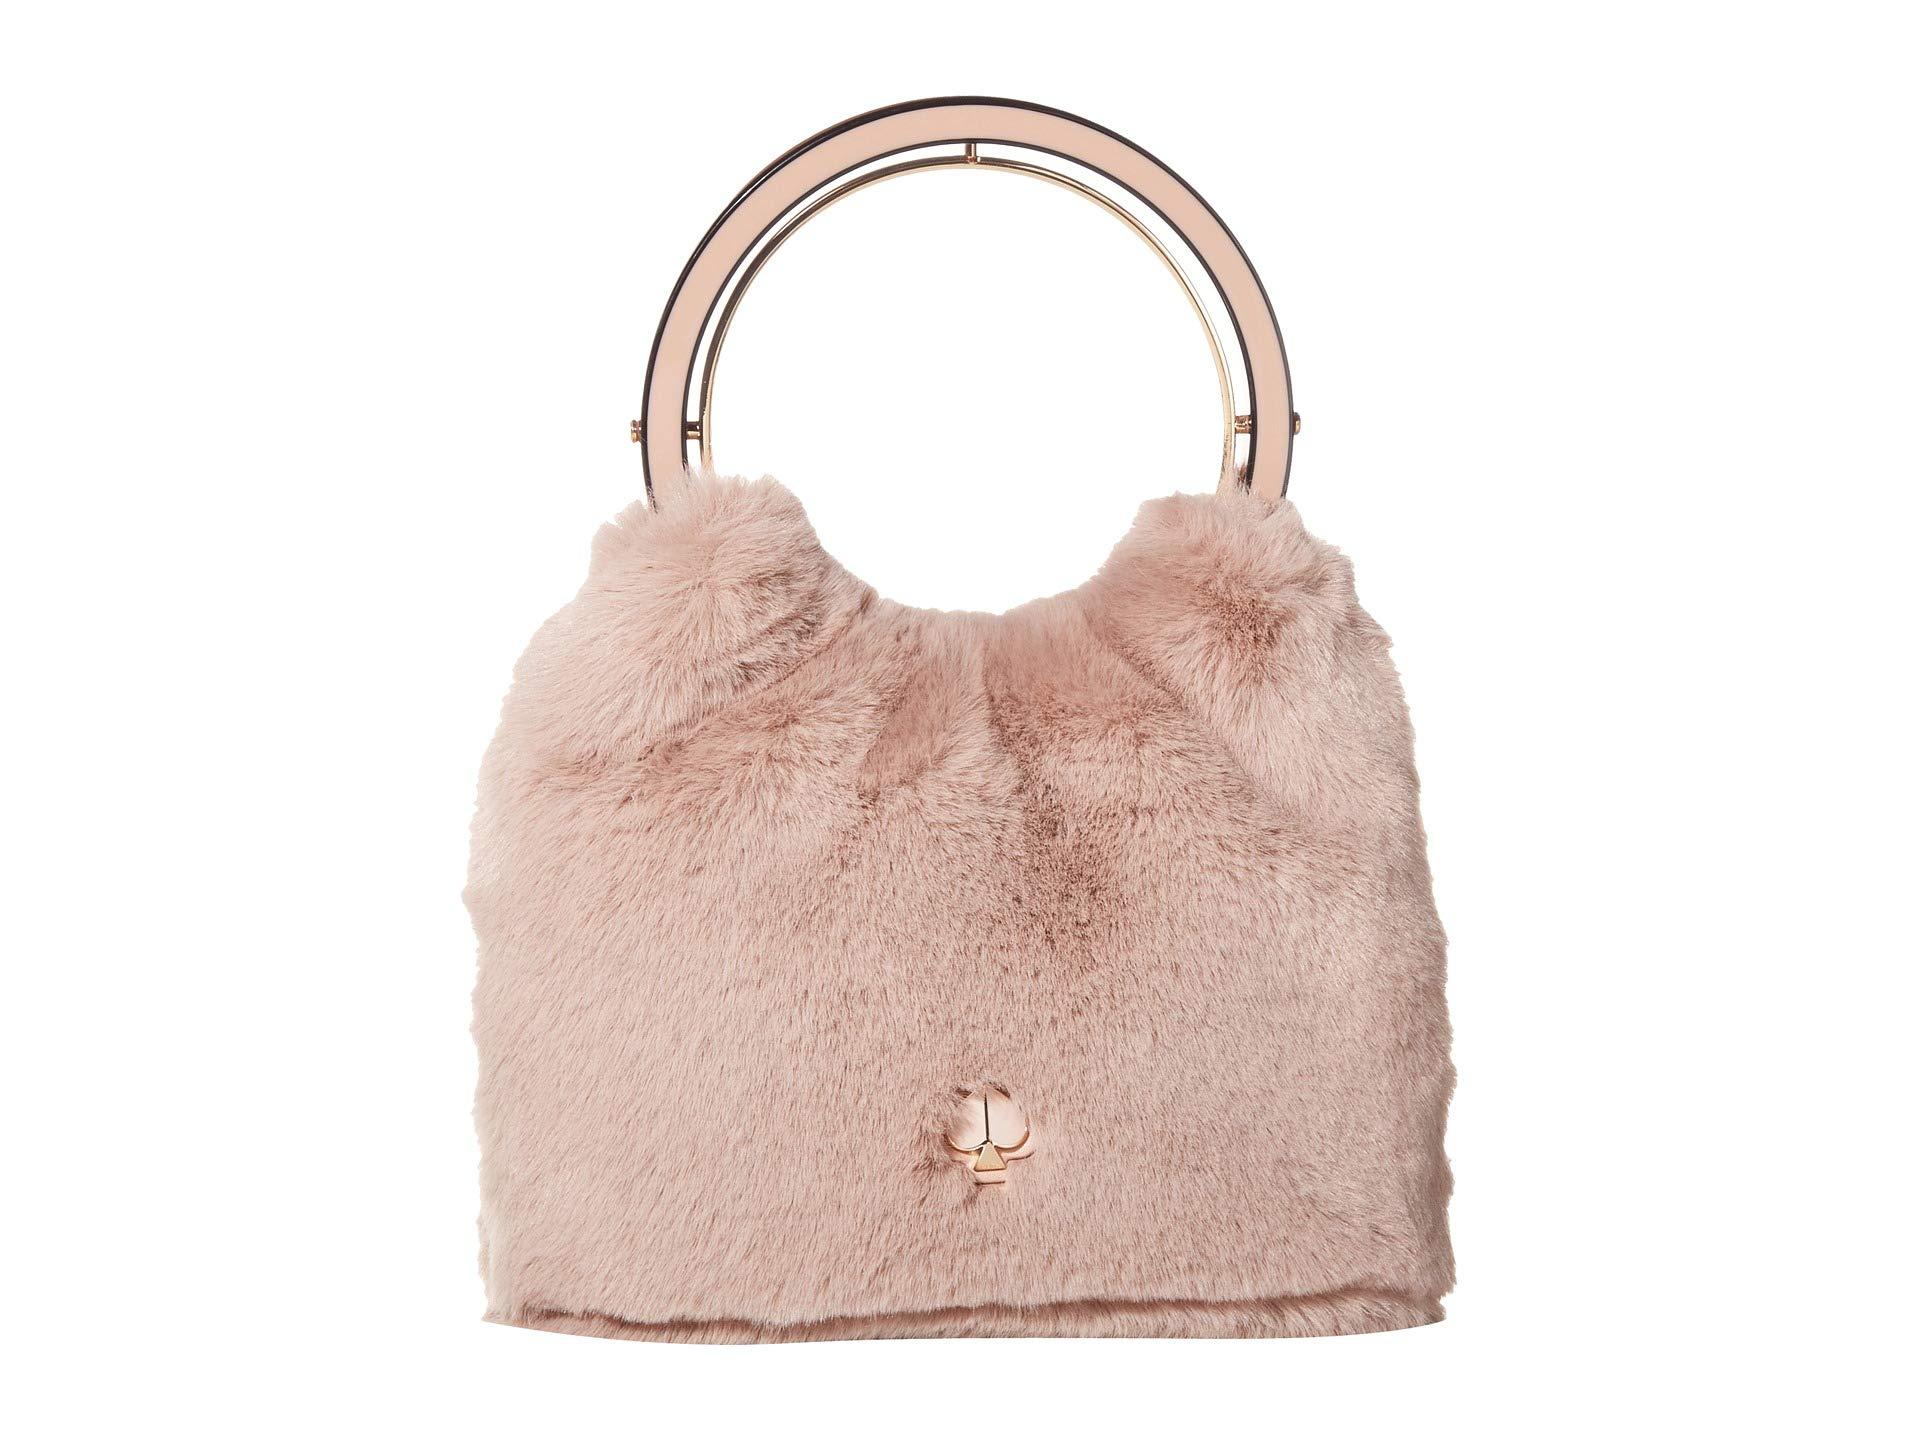 Kate Spade Betty Fur Swag Bag in Dusty Rose (Pink) - Lyst